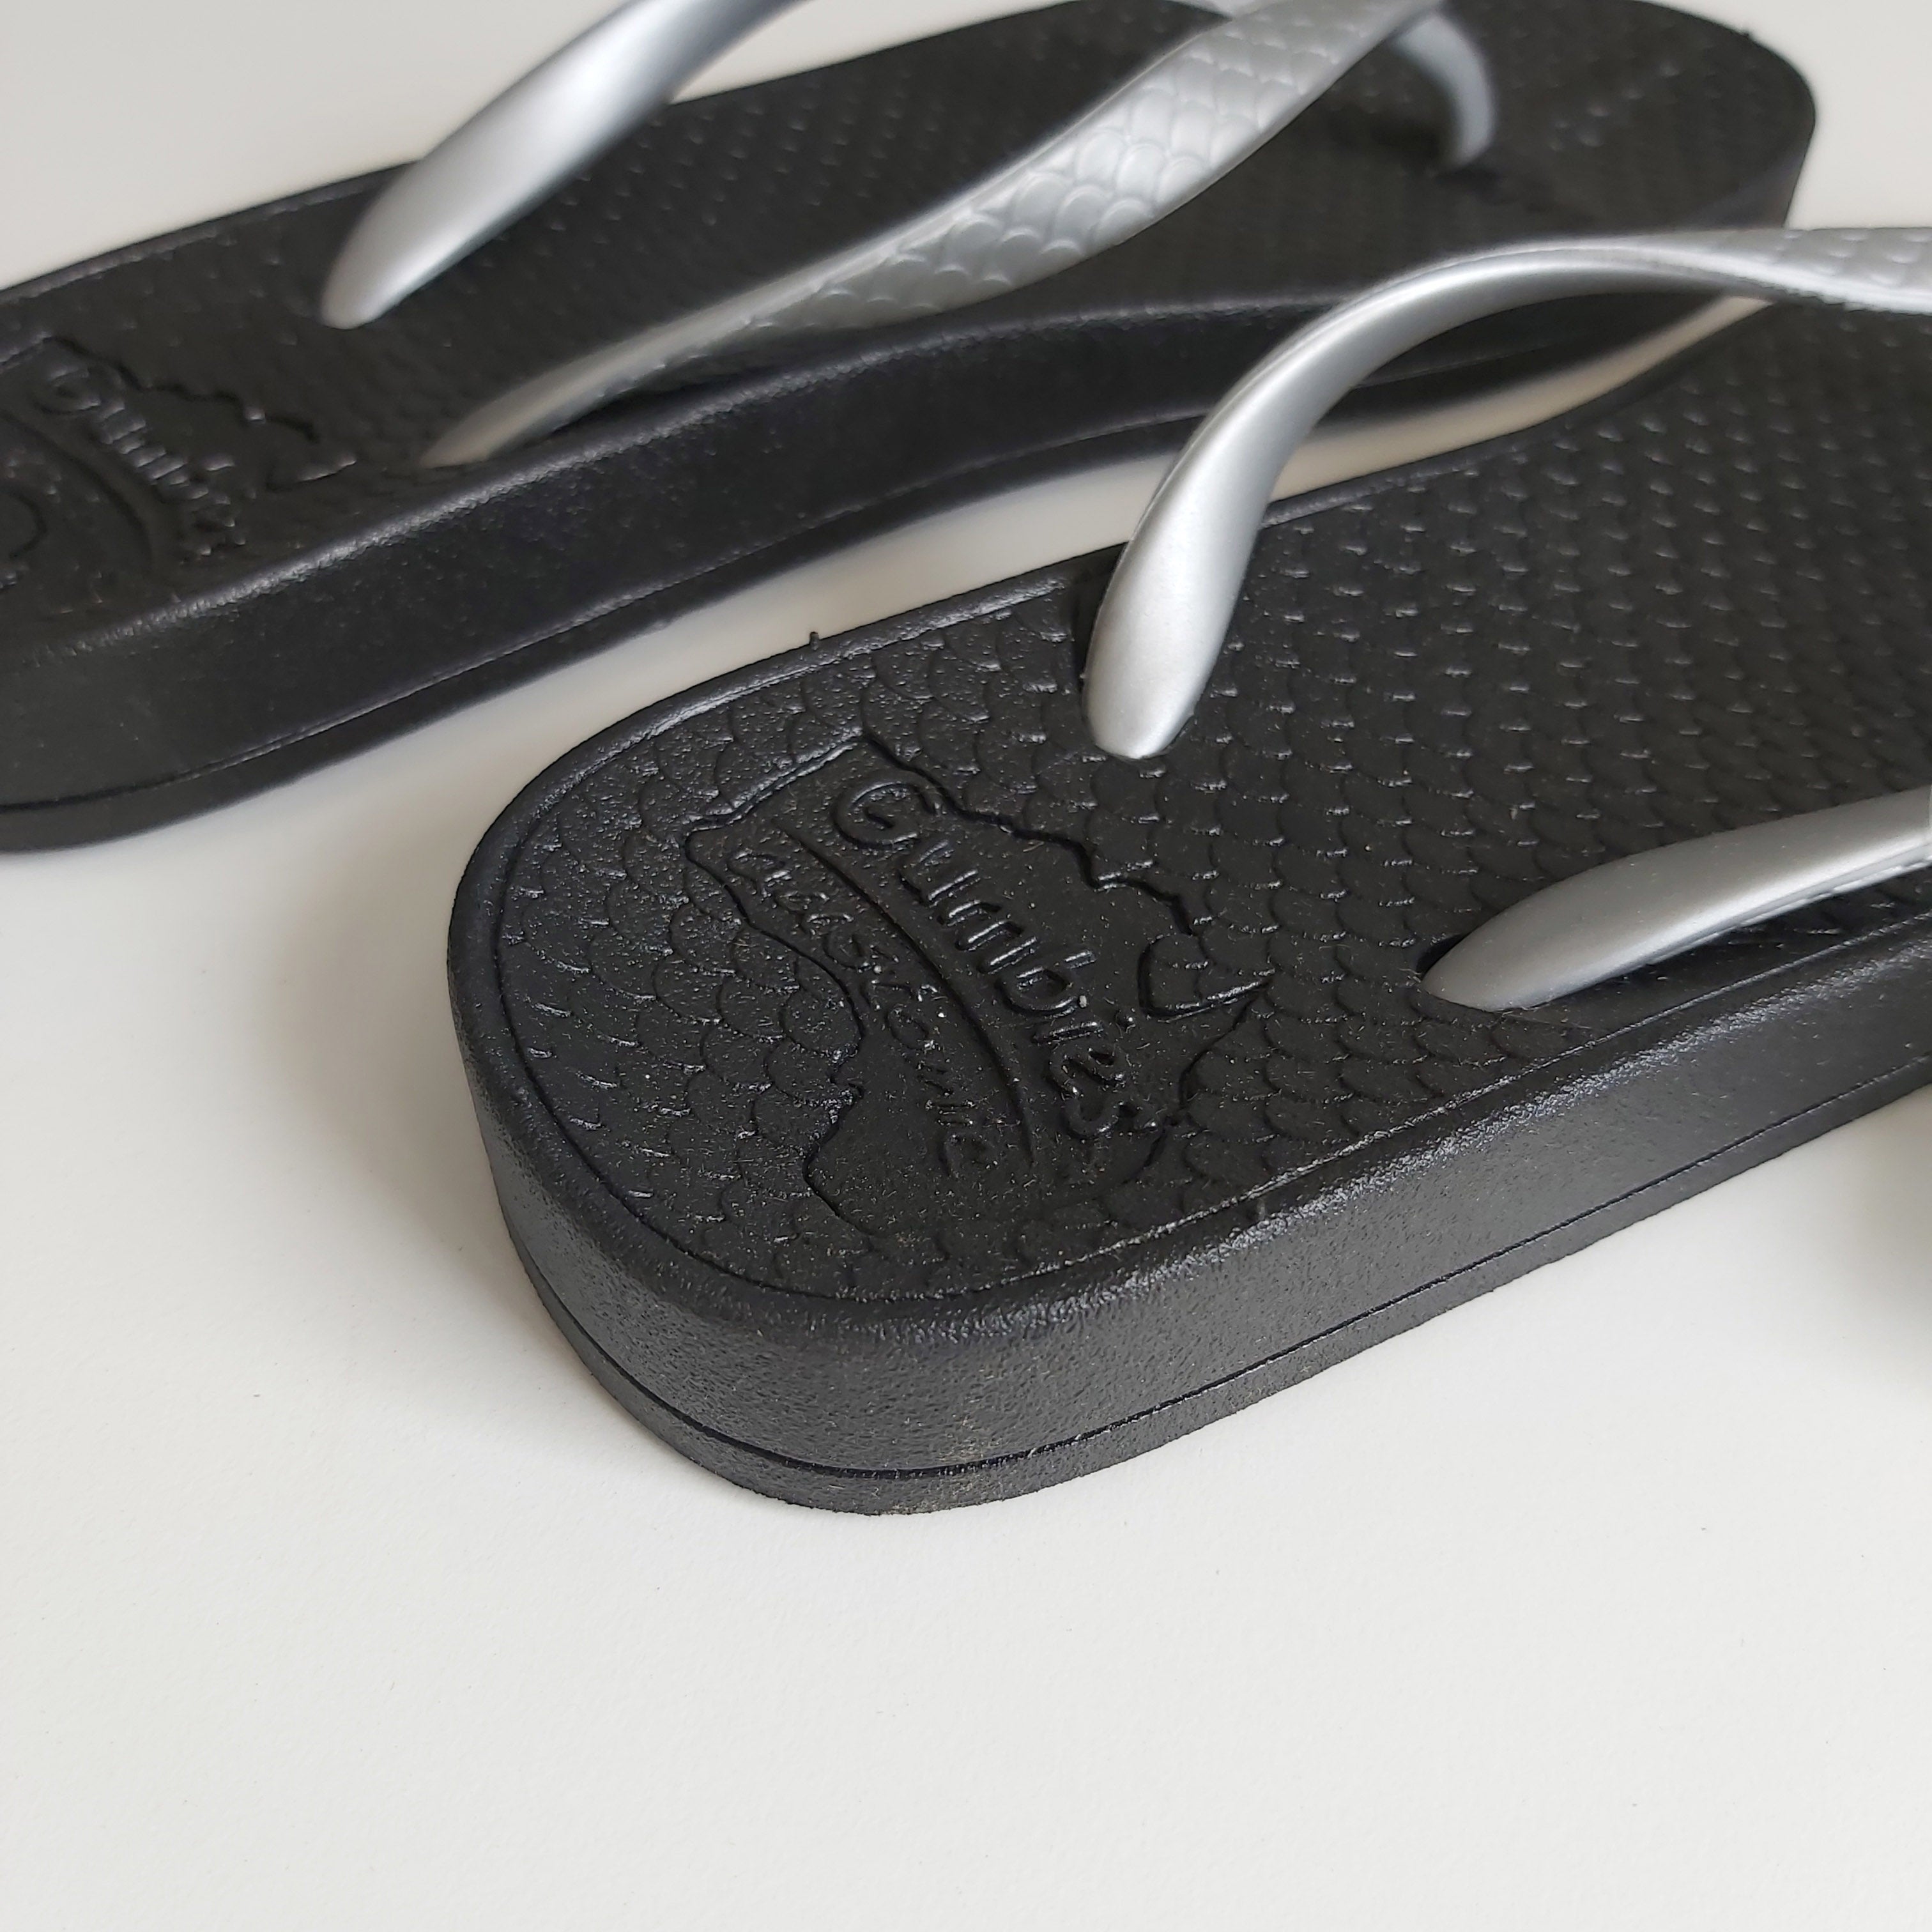 Gumbies Flip Flops -Black with Silver Strap UK Size 2/3